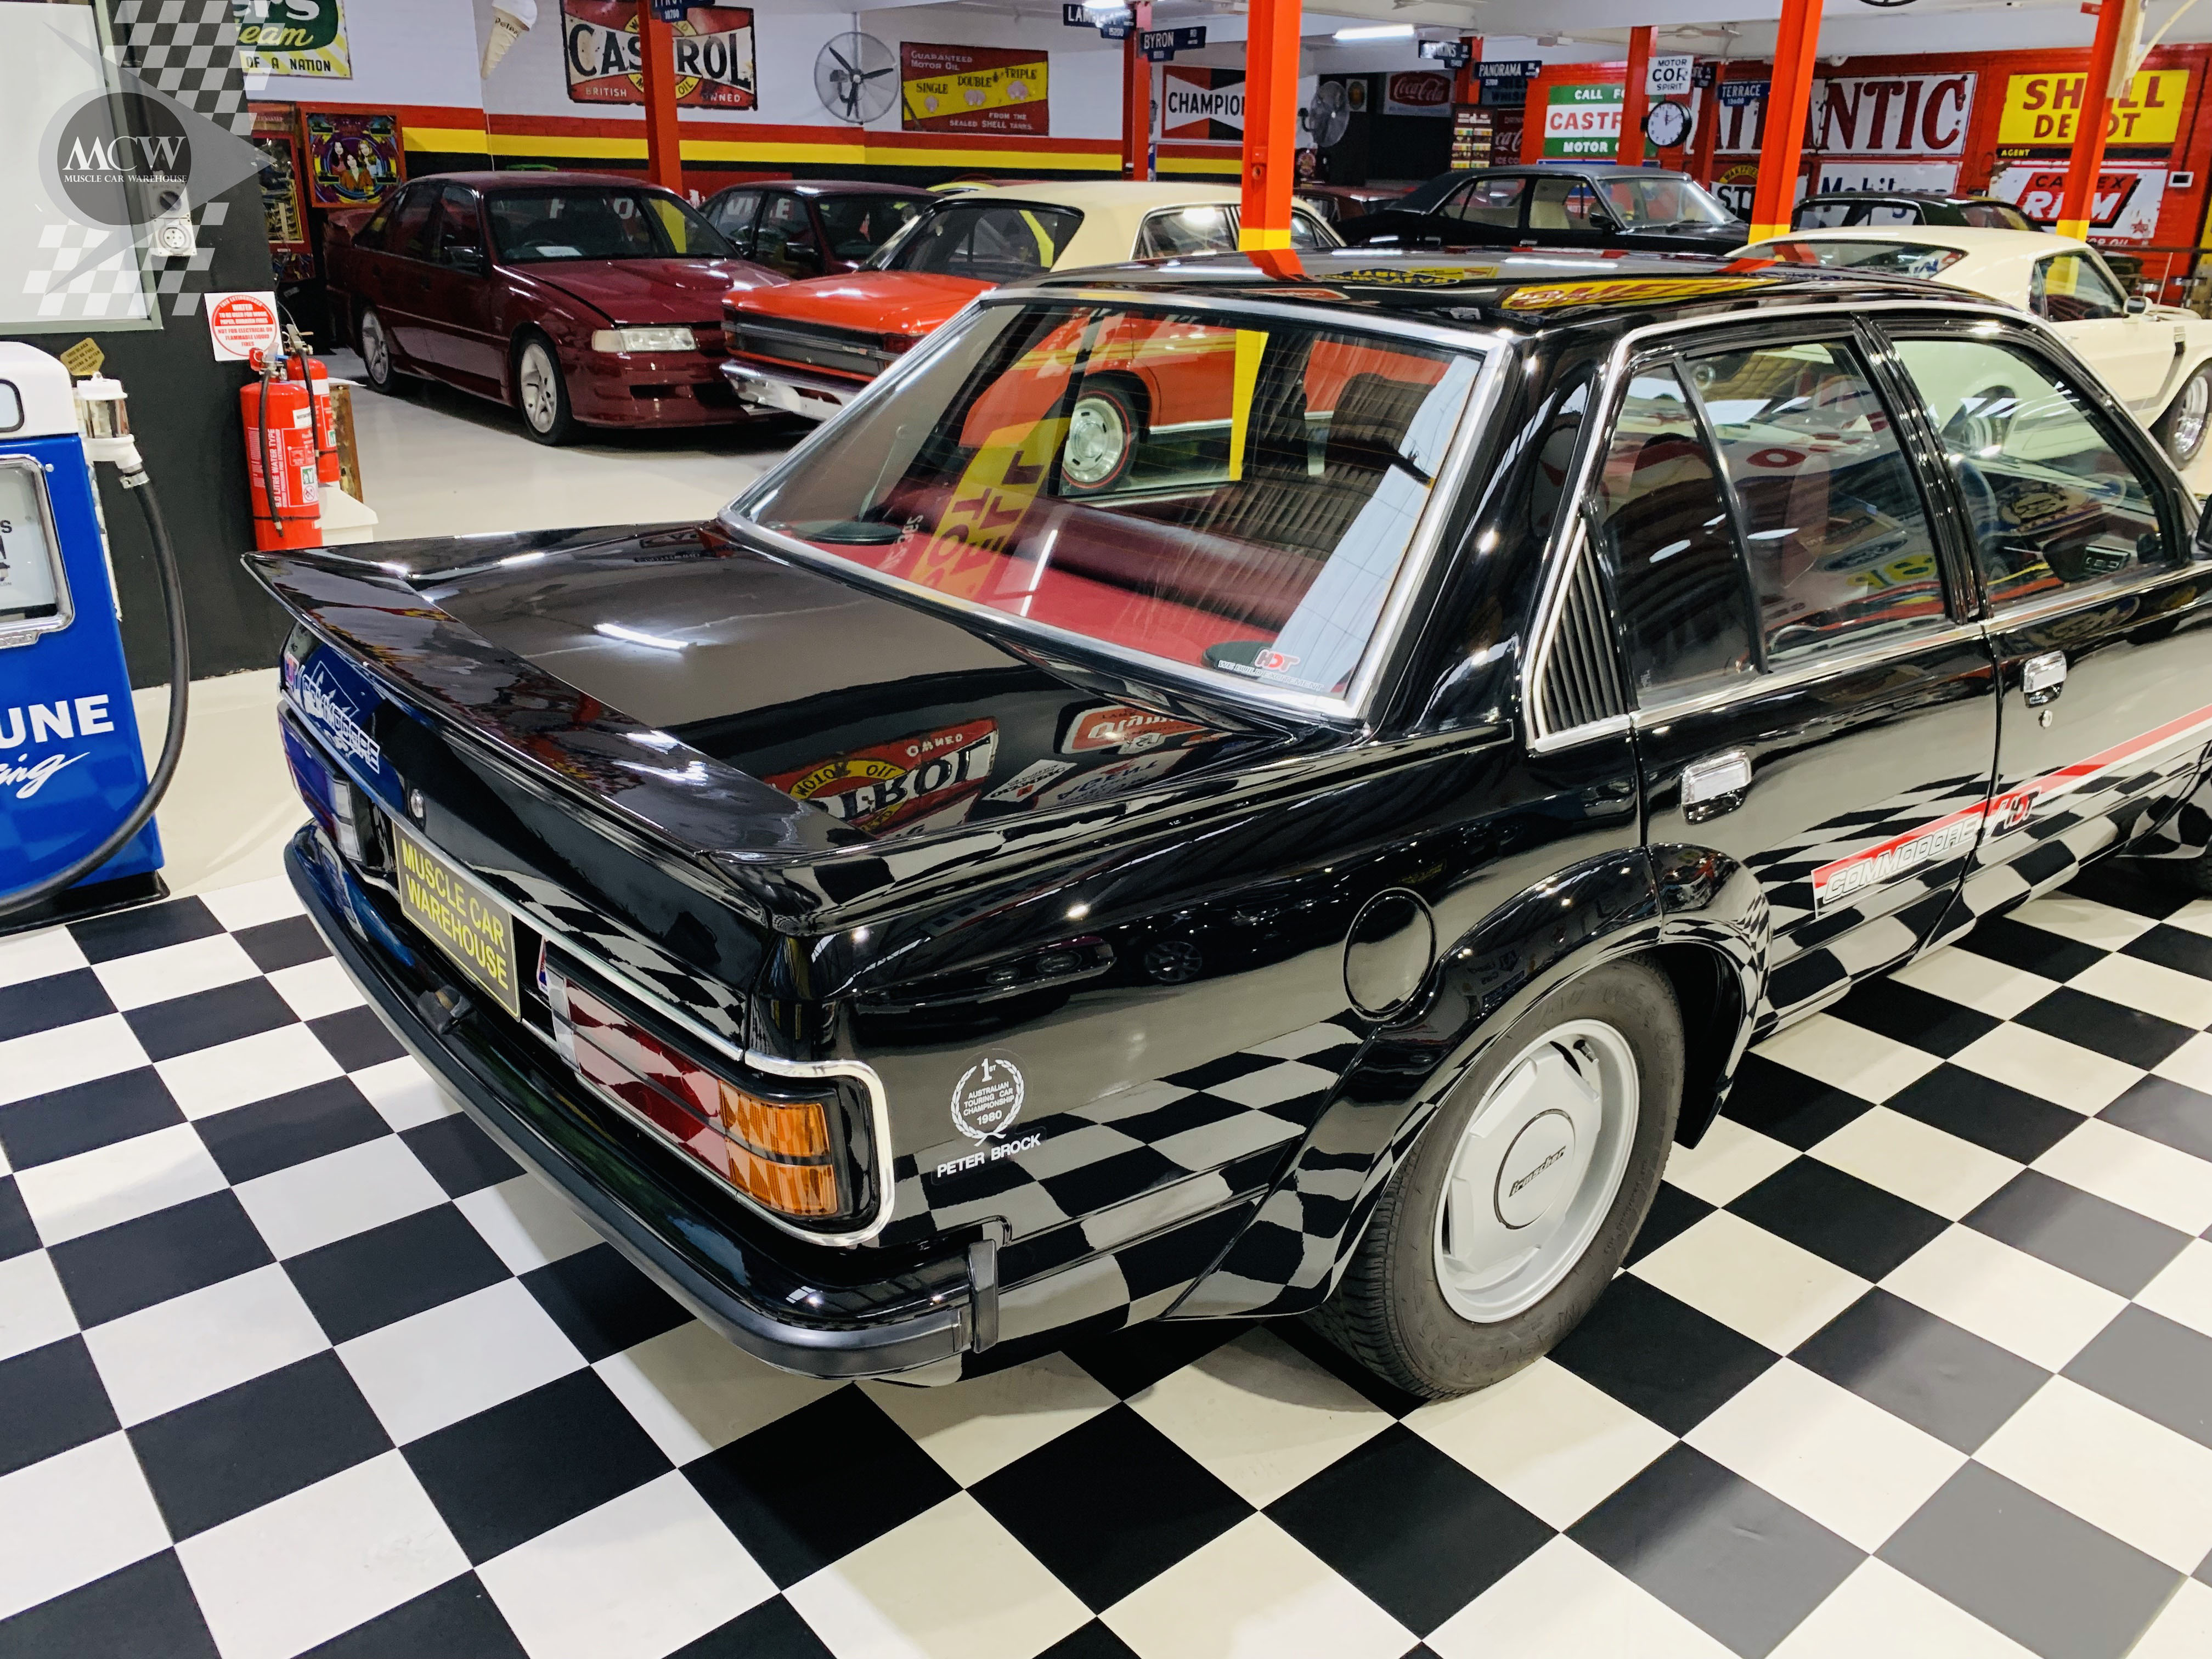 1980 Holden Commodore VC Brock HDT | Muscle Car Warehouse